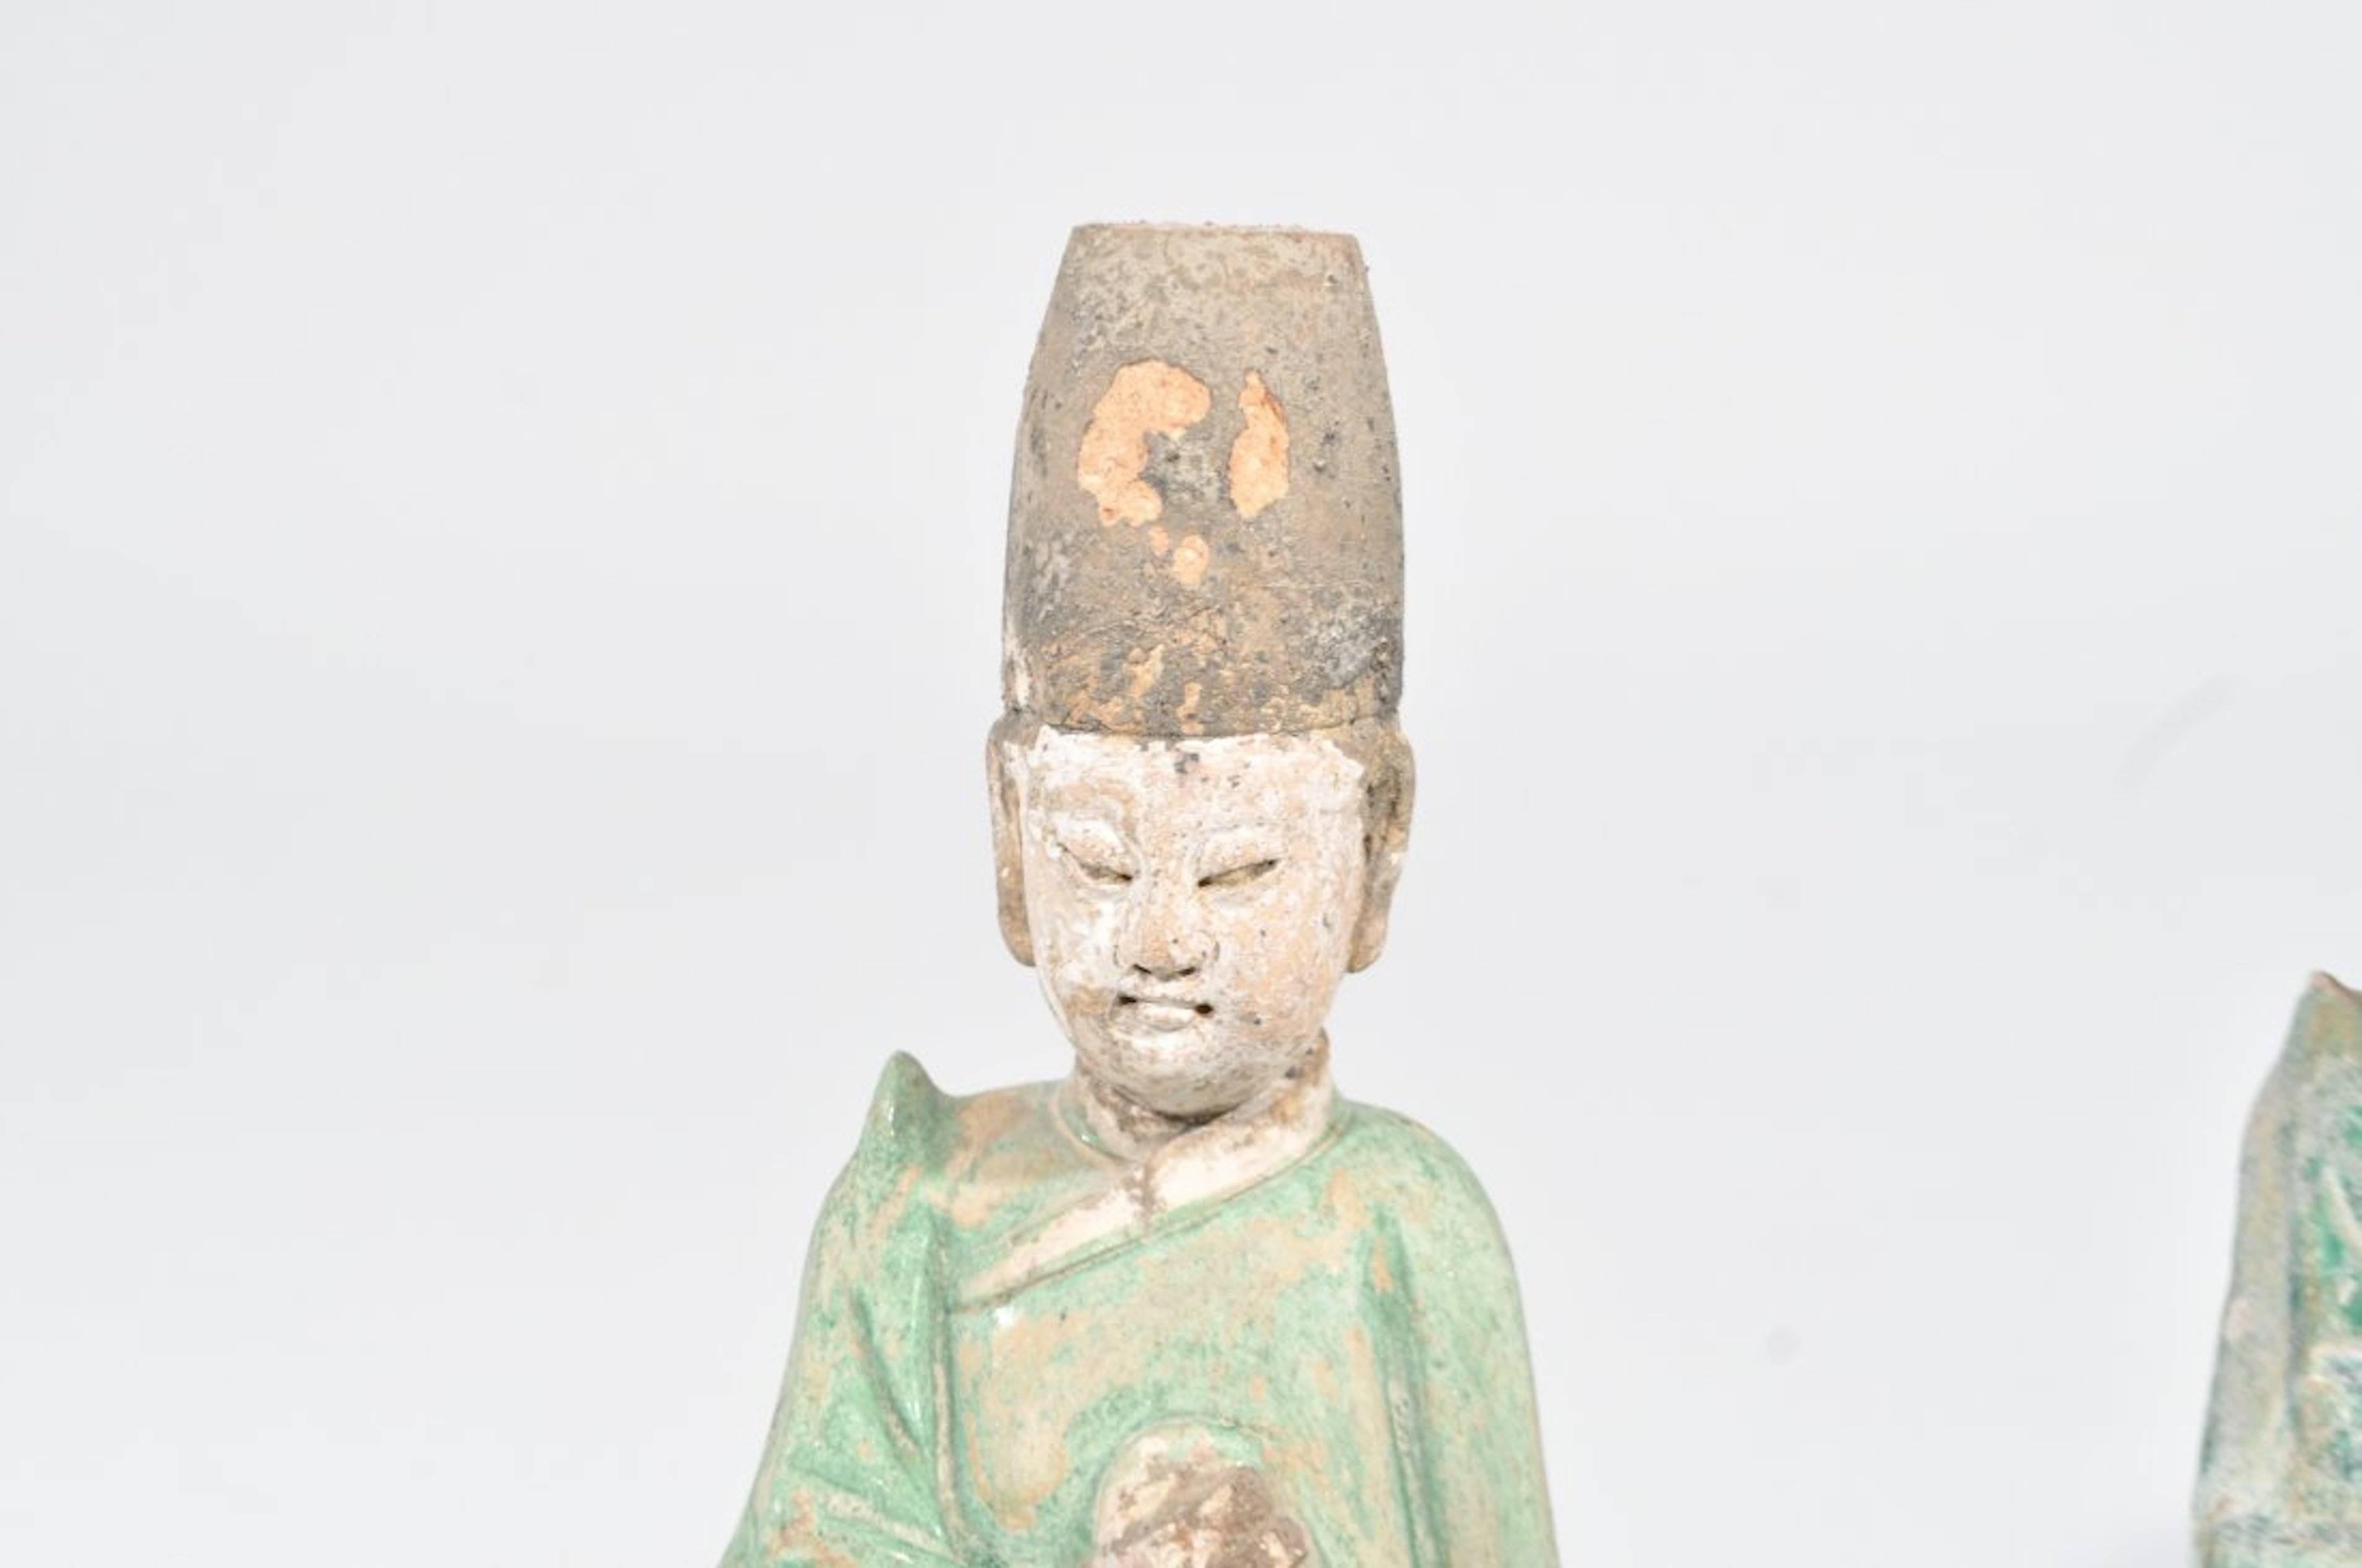 A pair of Chinese male earthenware attendant figures, hand-painted with pigments. Both figurines wear a tall black cap, green robes. Both figures are hollow and Stand on a raised hexagonal base. Figures such as these often were buried with the